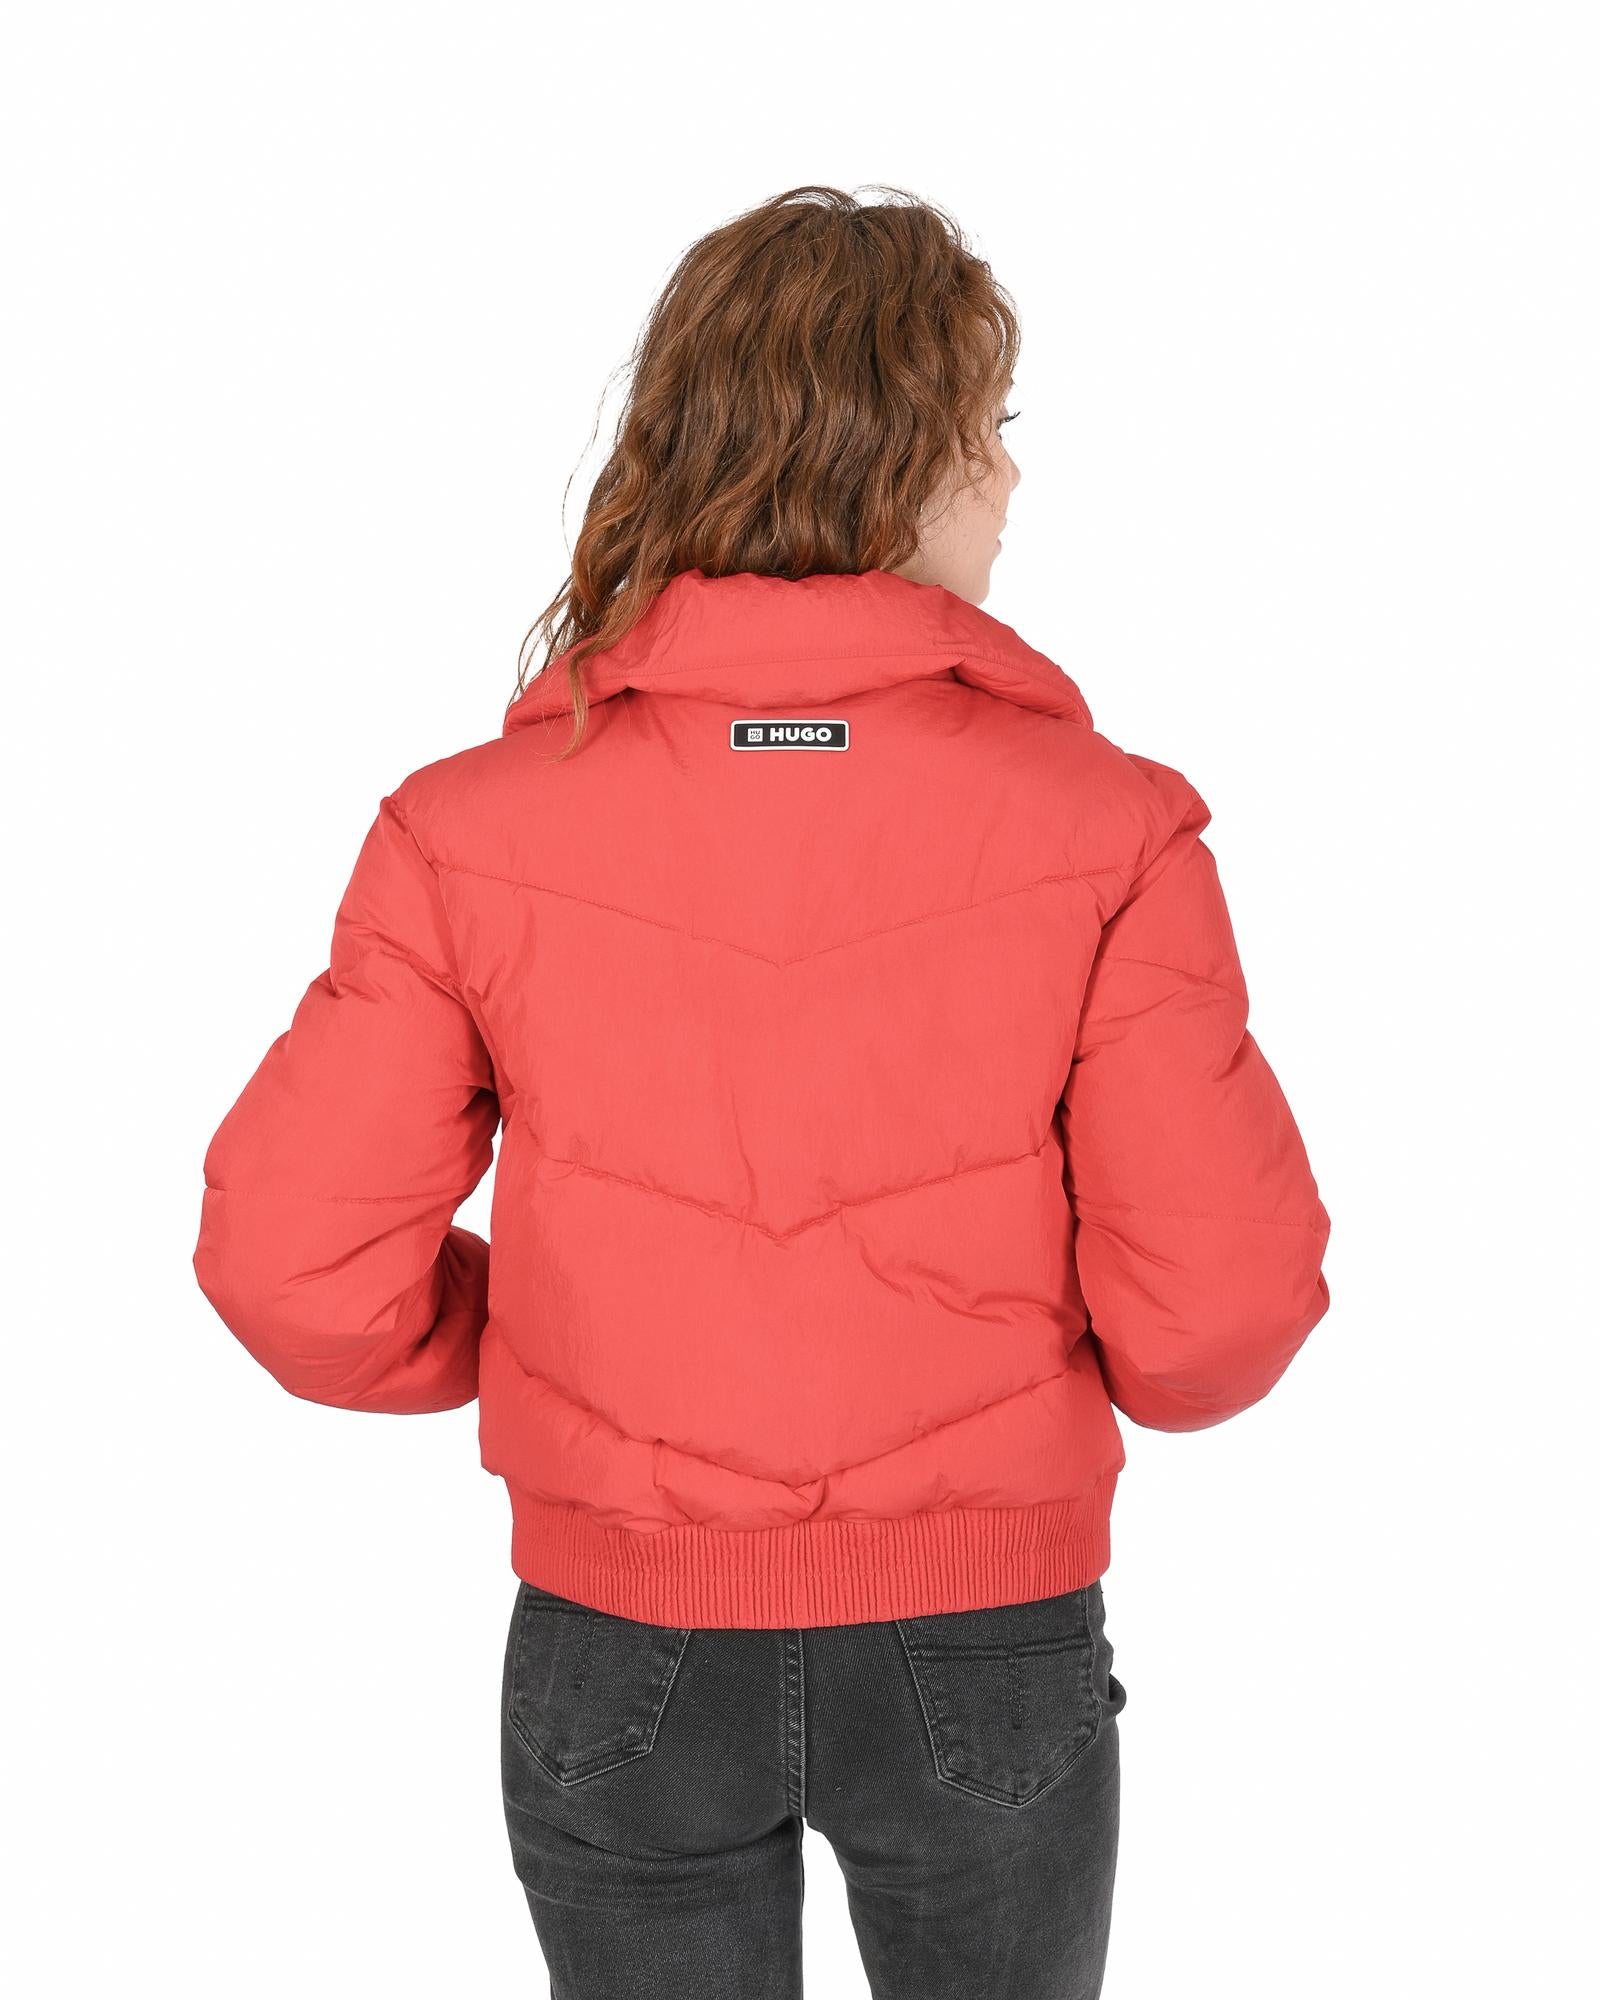 Women's Red Polyamide Jacket in Red - S